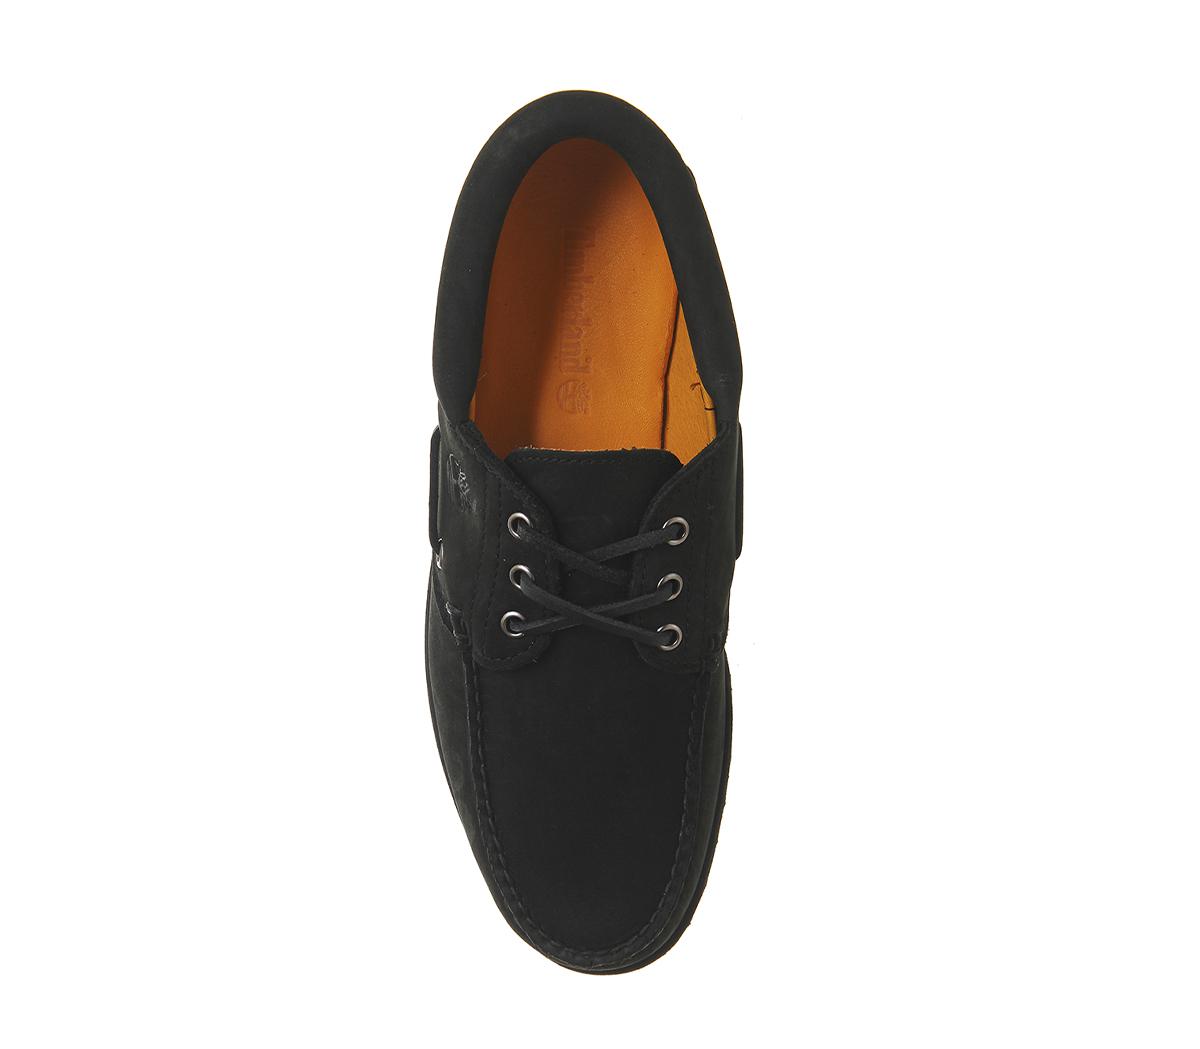 Timberland Leather 3 Eye Classic Lug Boat Shoes in Black for Men - Lyst